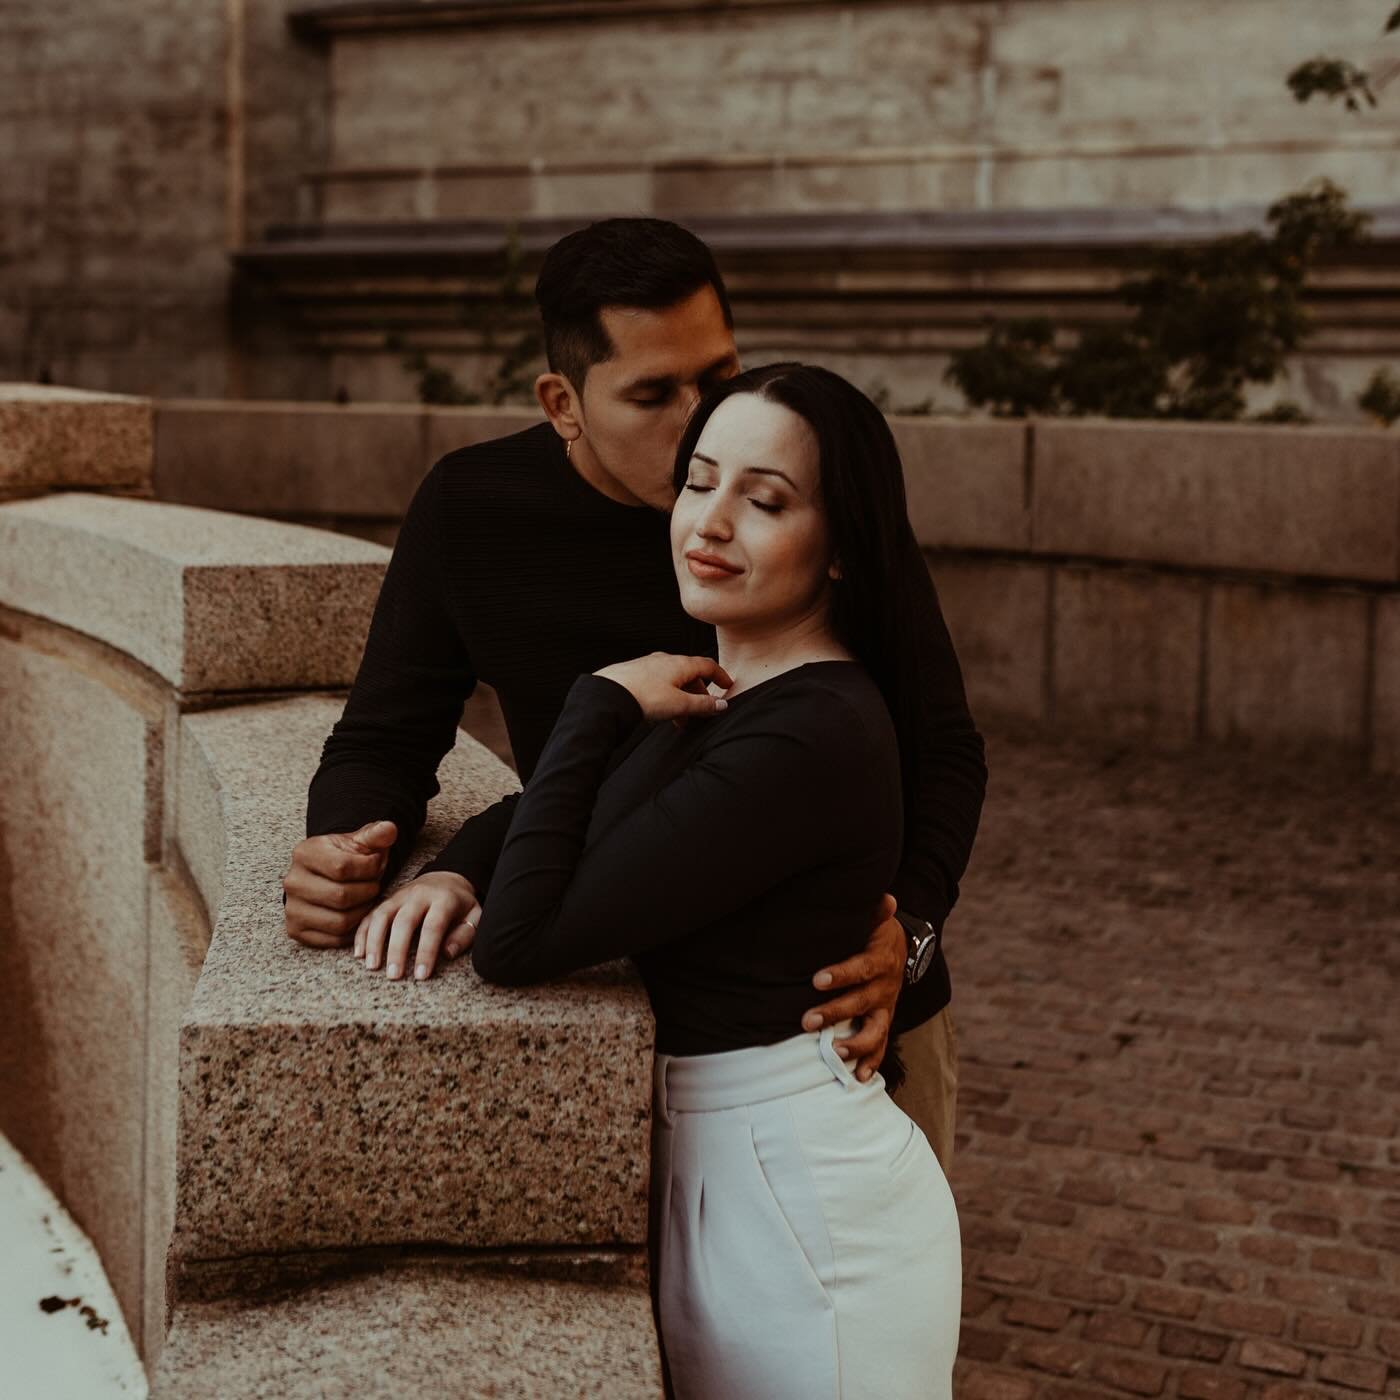 Sofia + Fernando on the blogue for their engagement session ❤️ can&rsquo;t wait for june 15 !